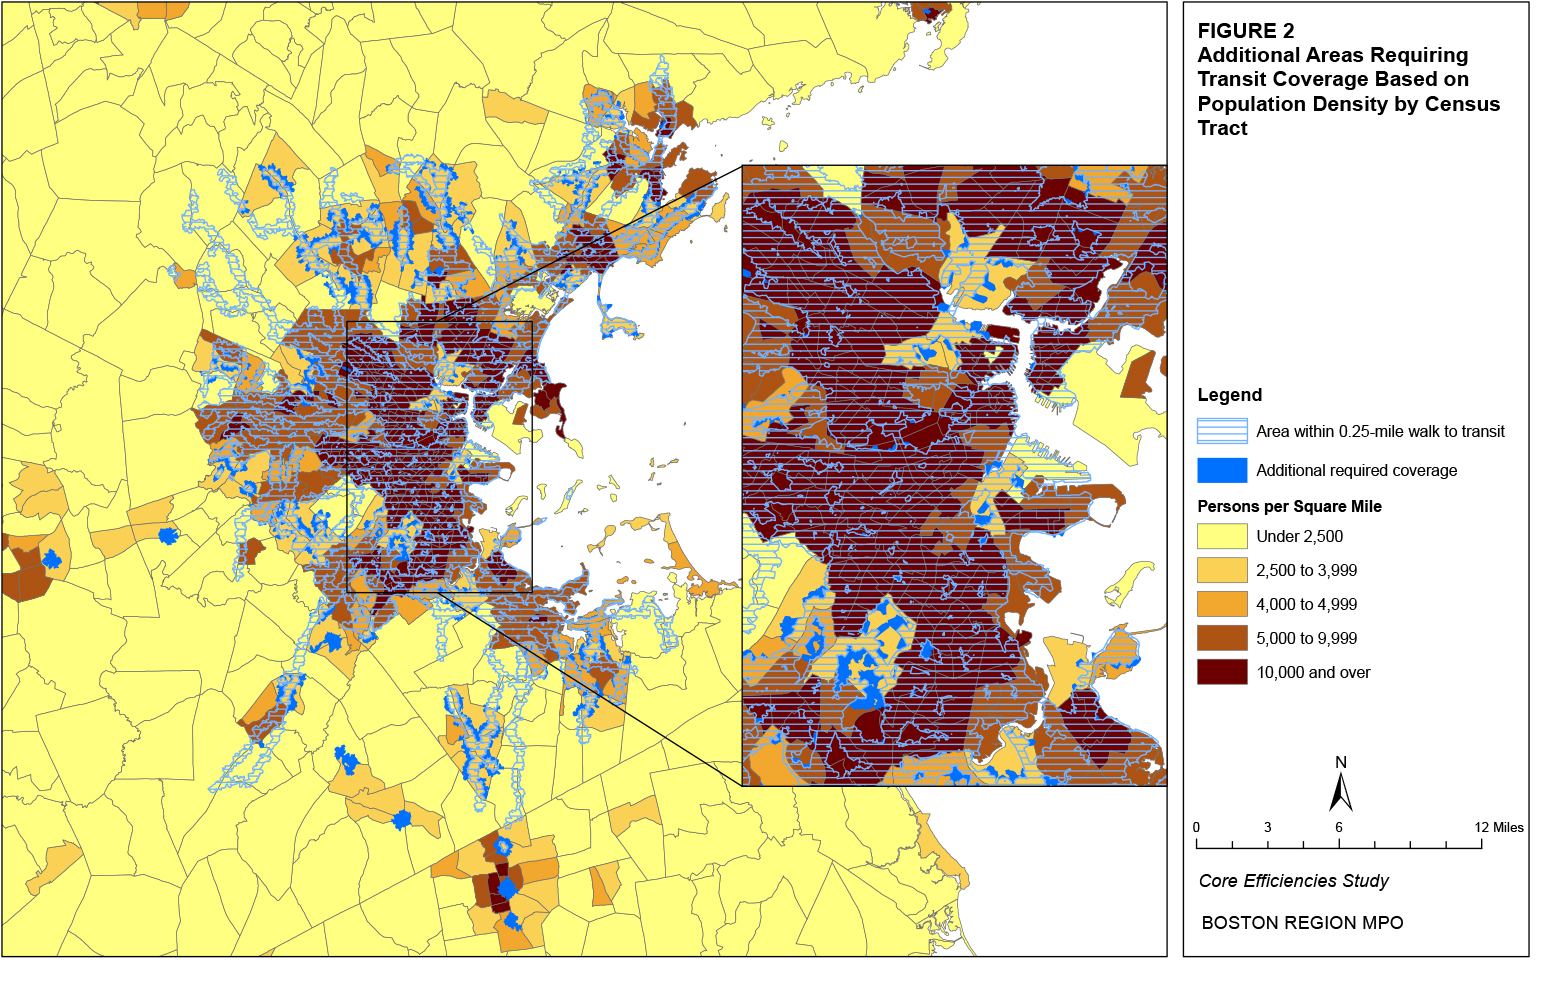 This map shows the additional coverage that would be required by having varying coverage thresholds based on the population density.